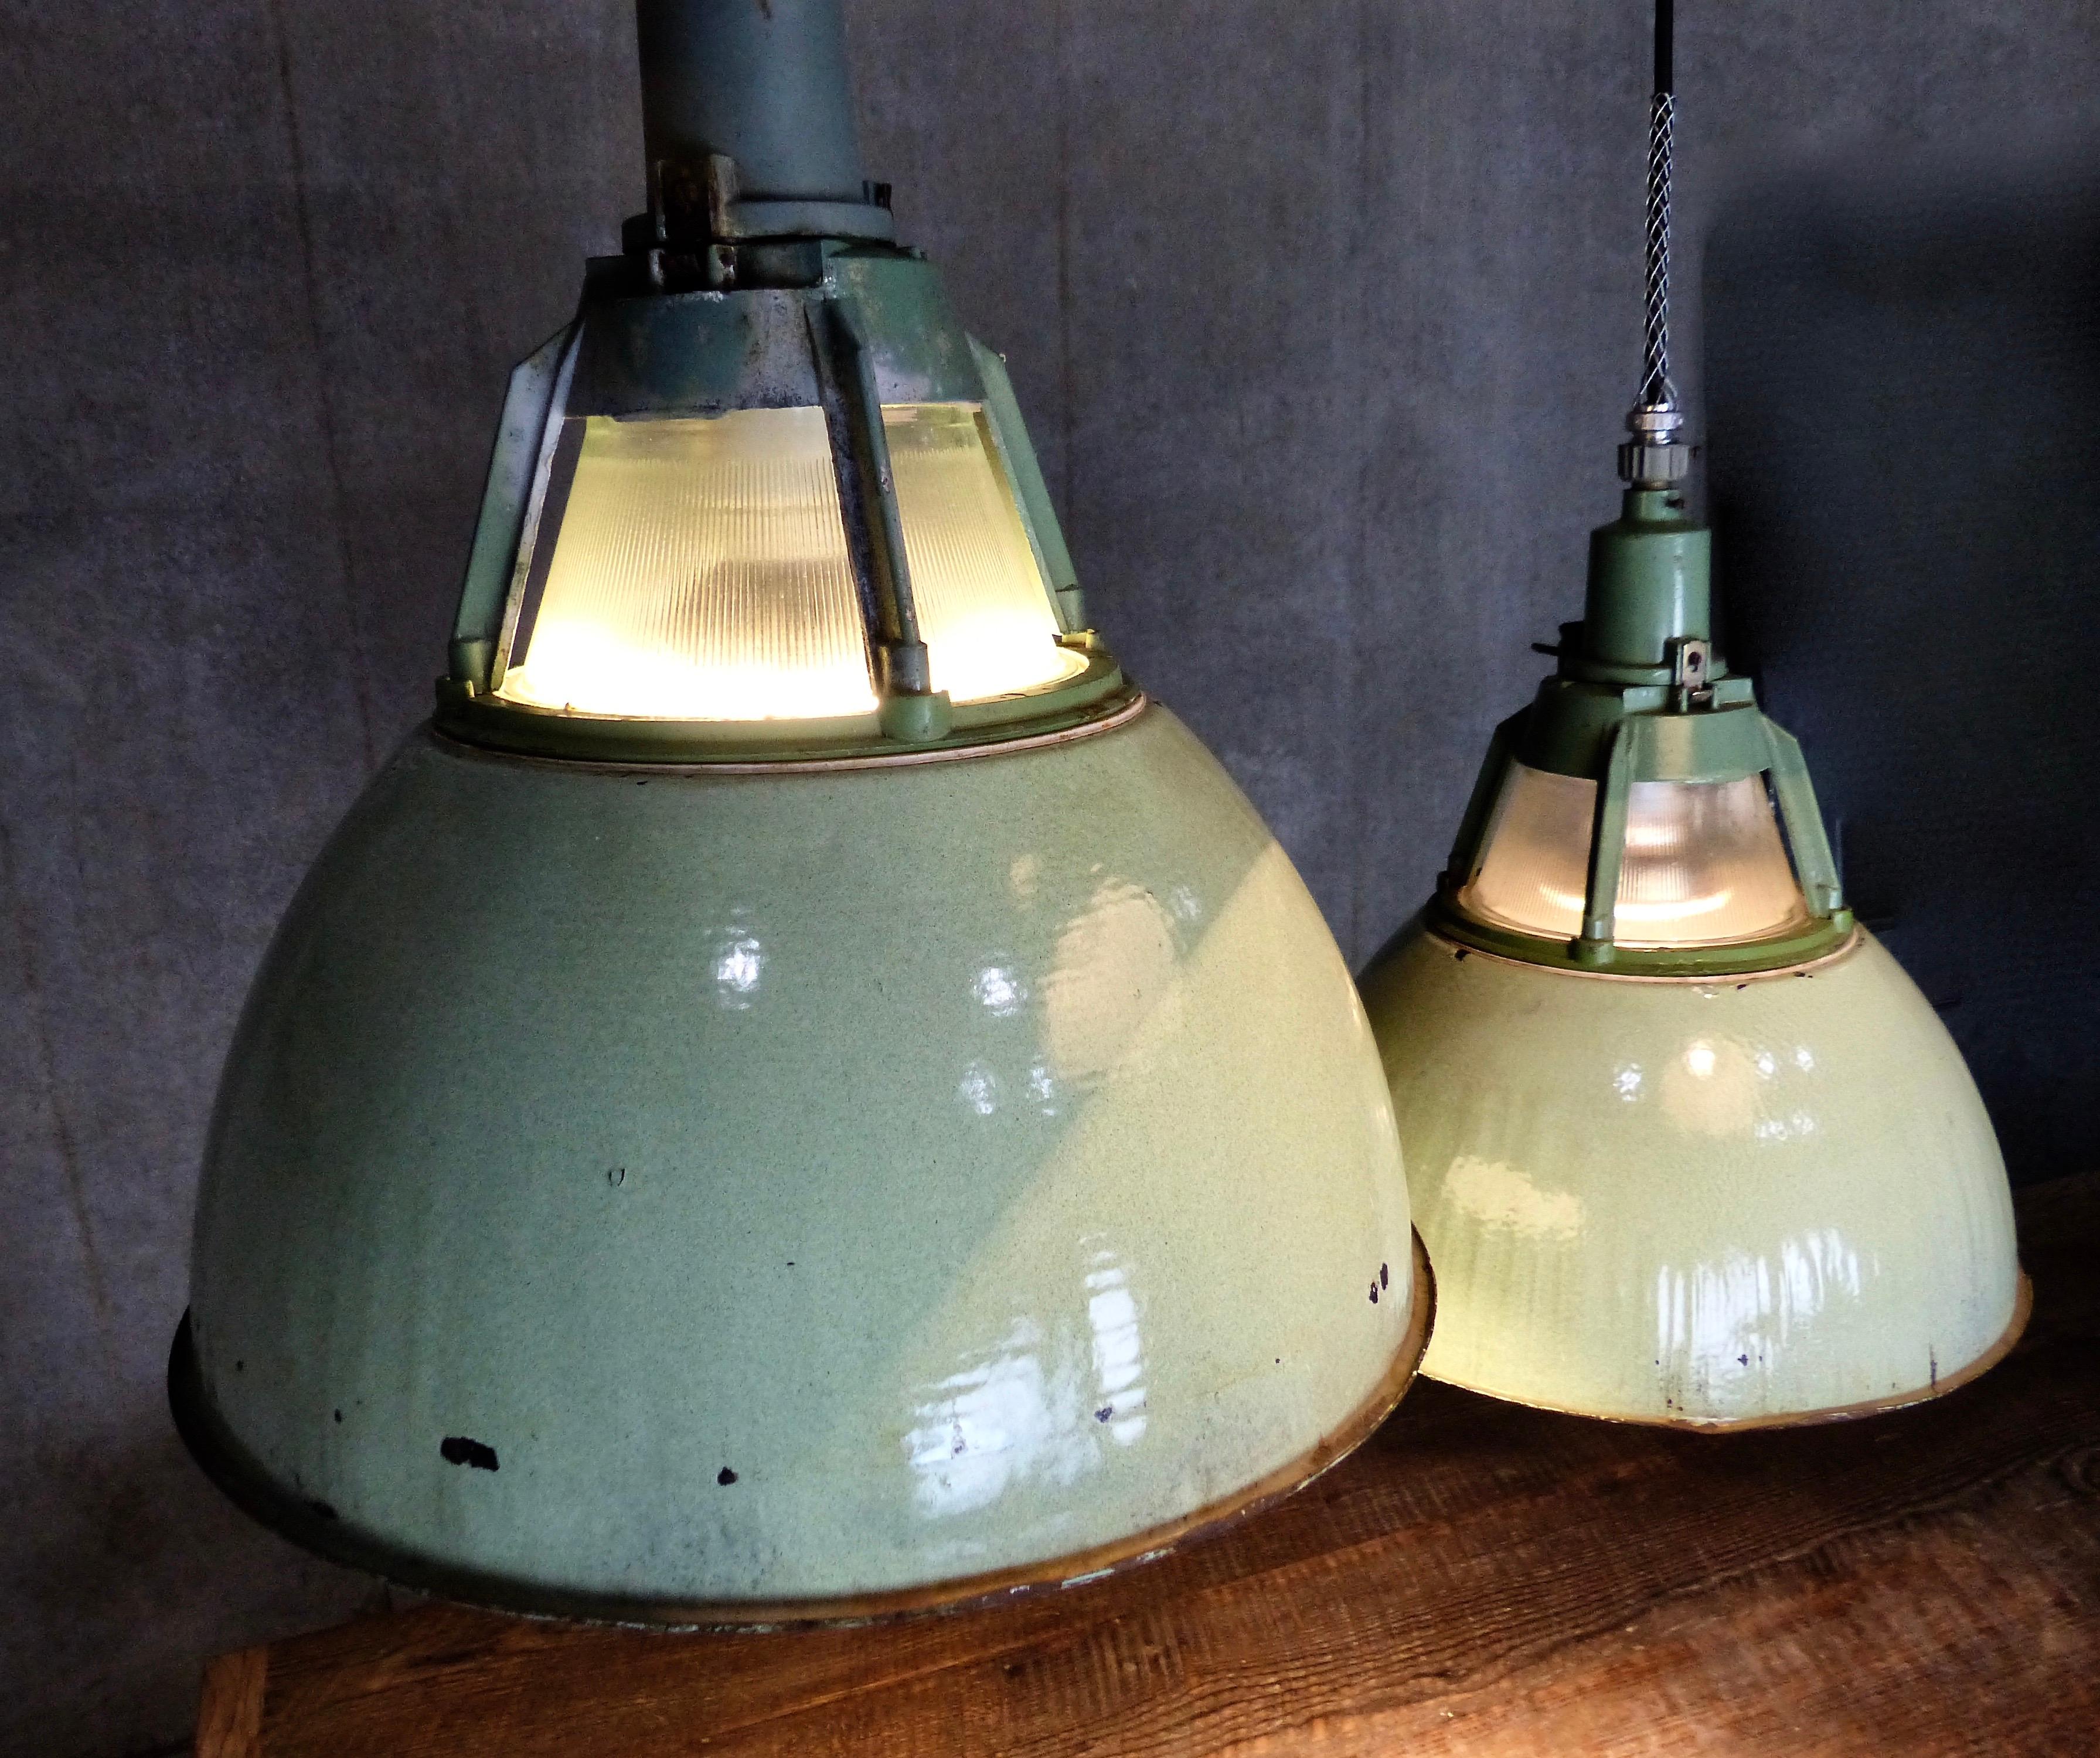 Set of six European industrial pendants in original pale green enamel. Rippled glass shade (within a cage) plus protective glass shade cover. Great look in a rarely seen light. Re-wired, and inspected and approved to current electrical standards;